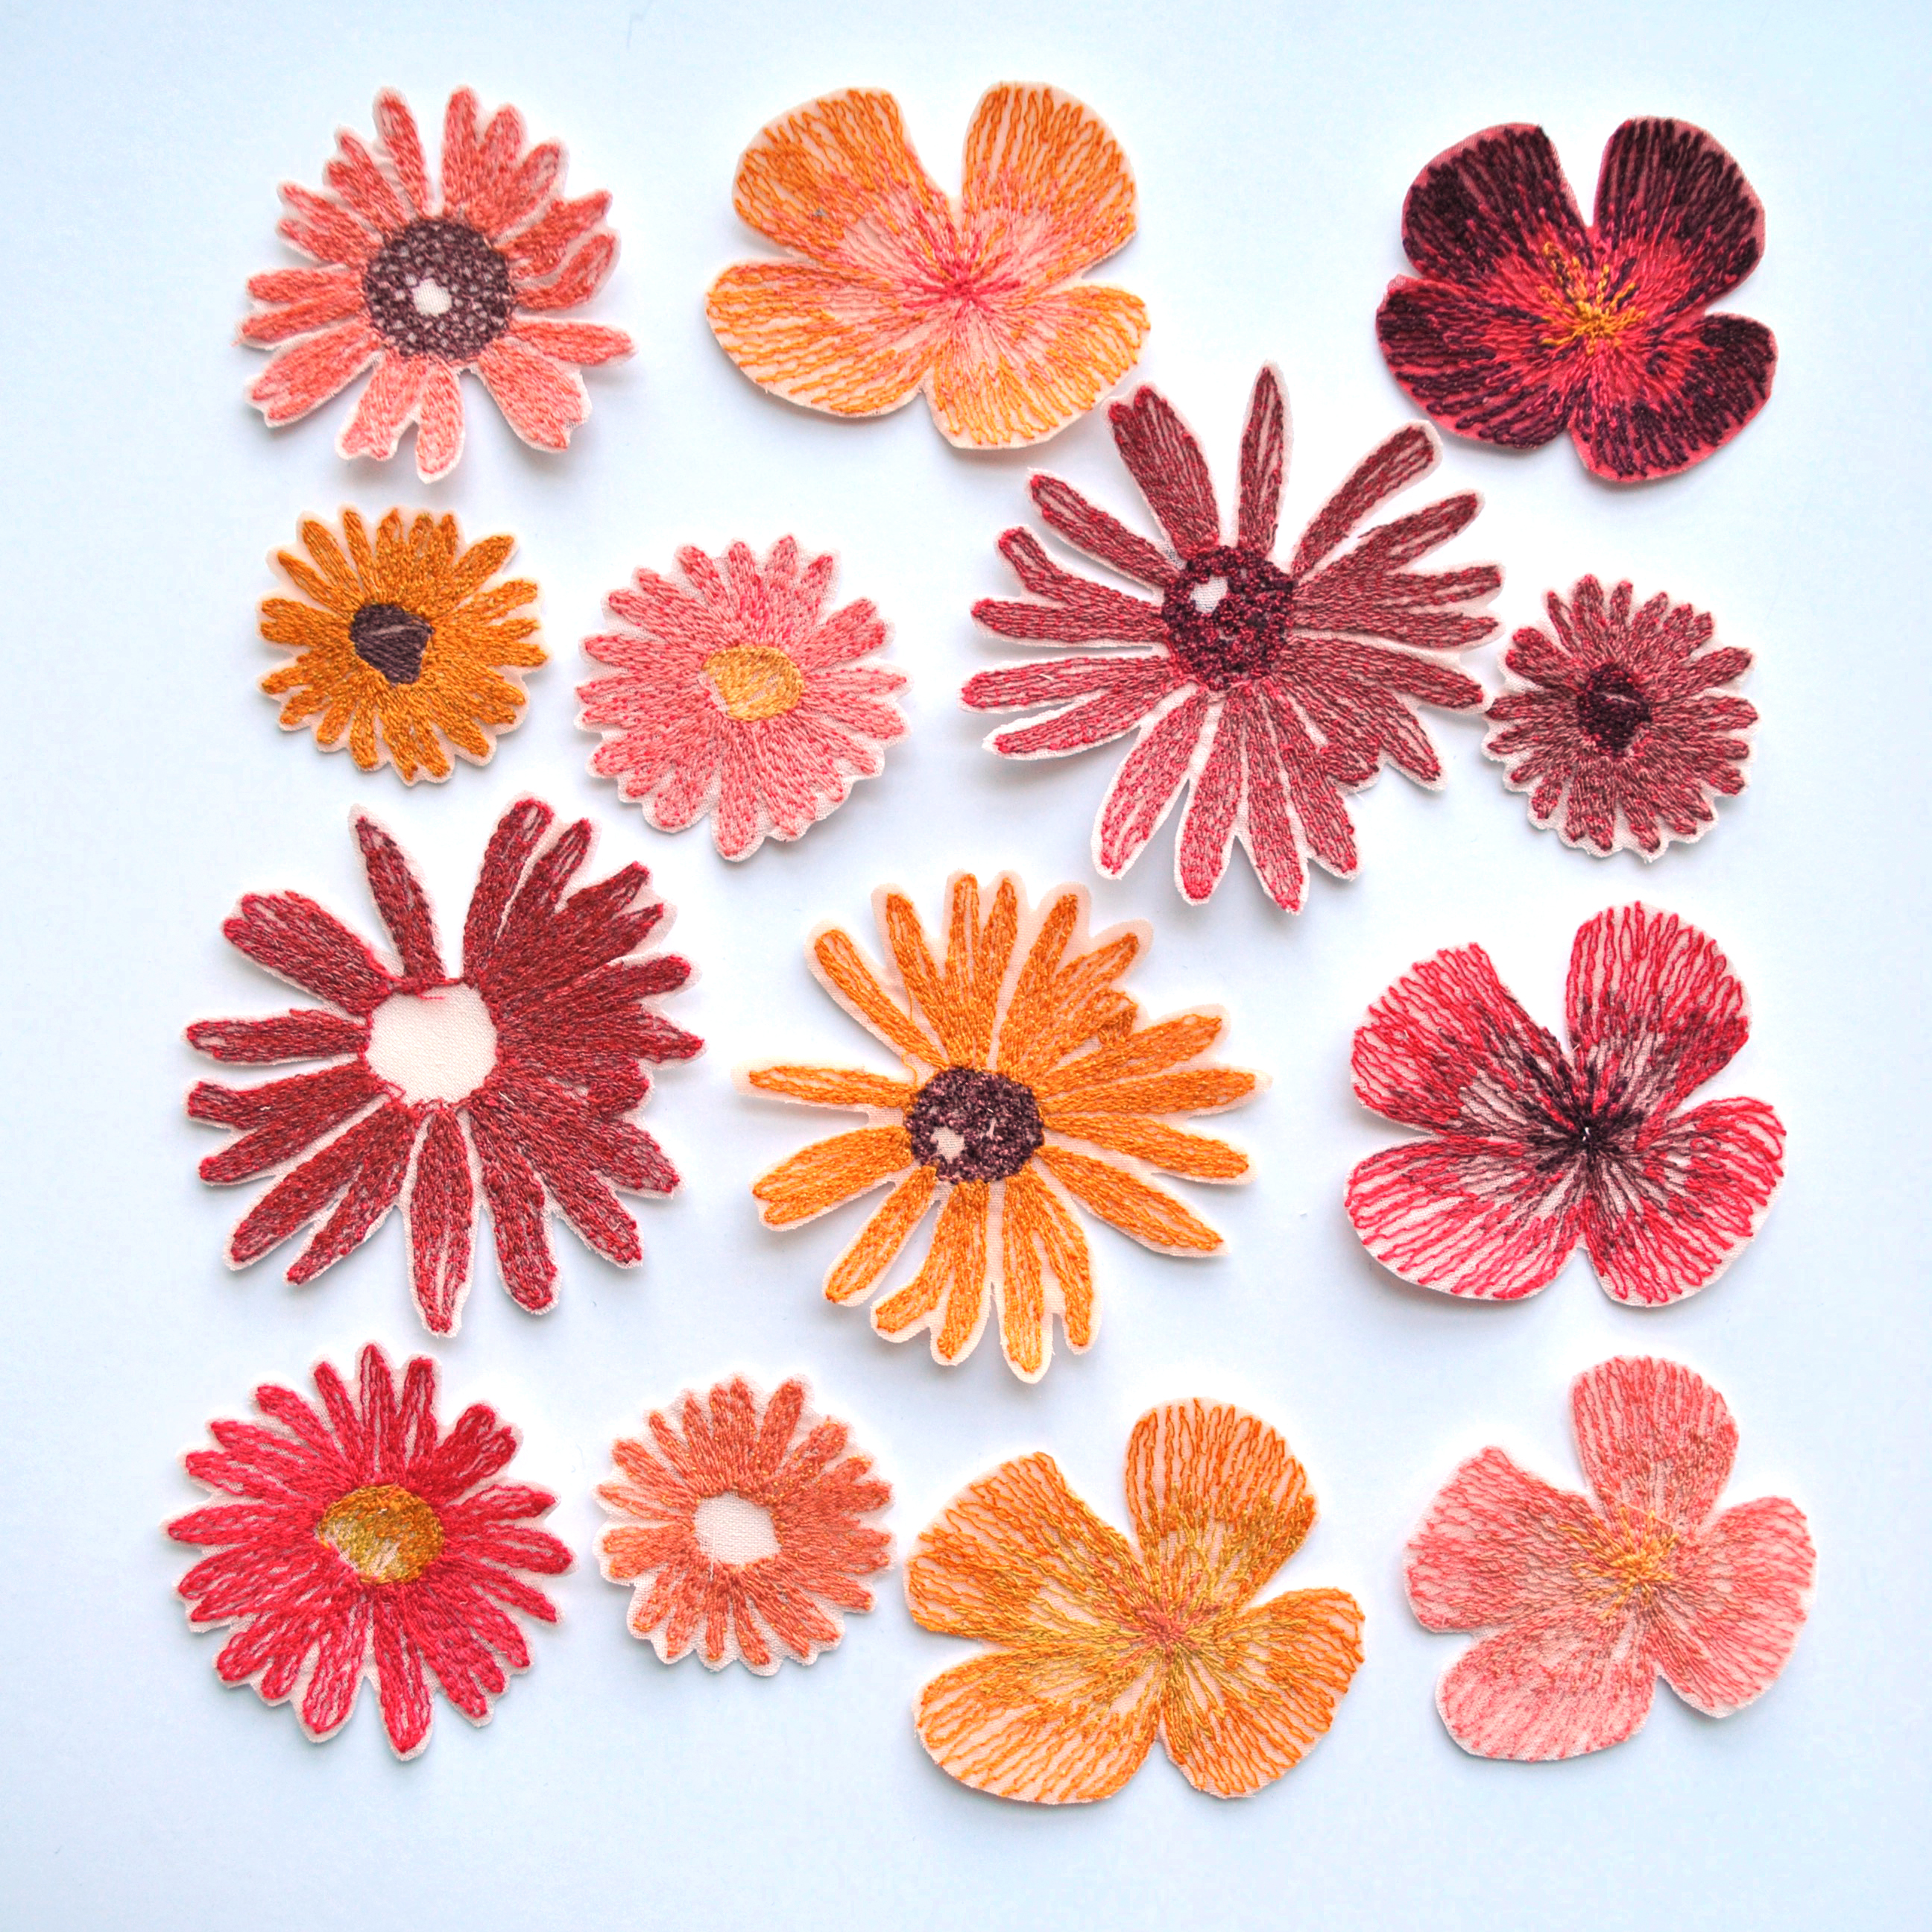 Warm Tones Flower Patches: 14 Pack